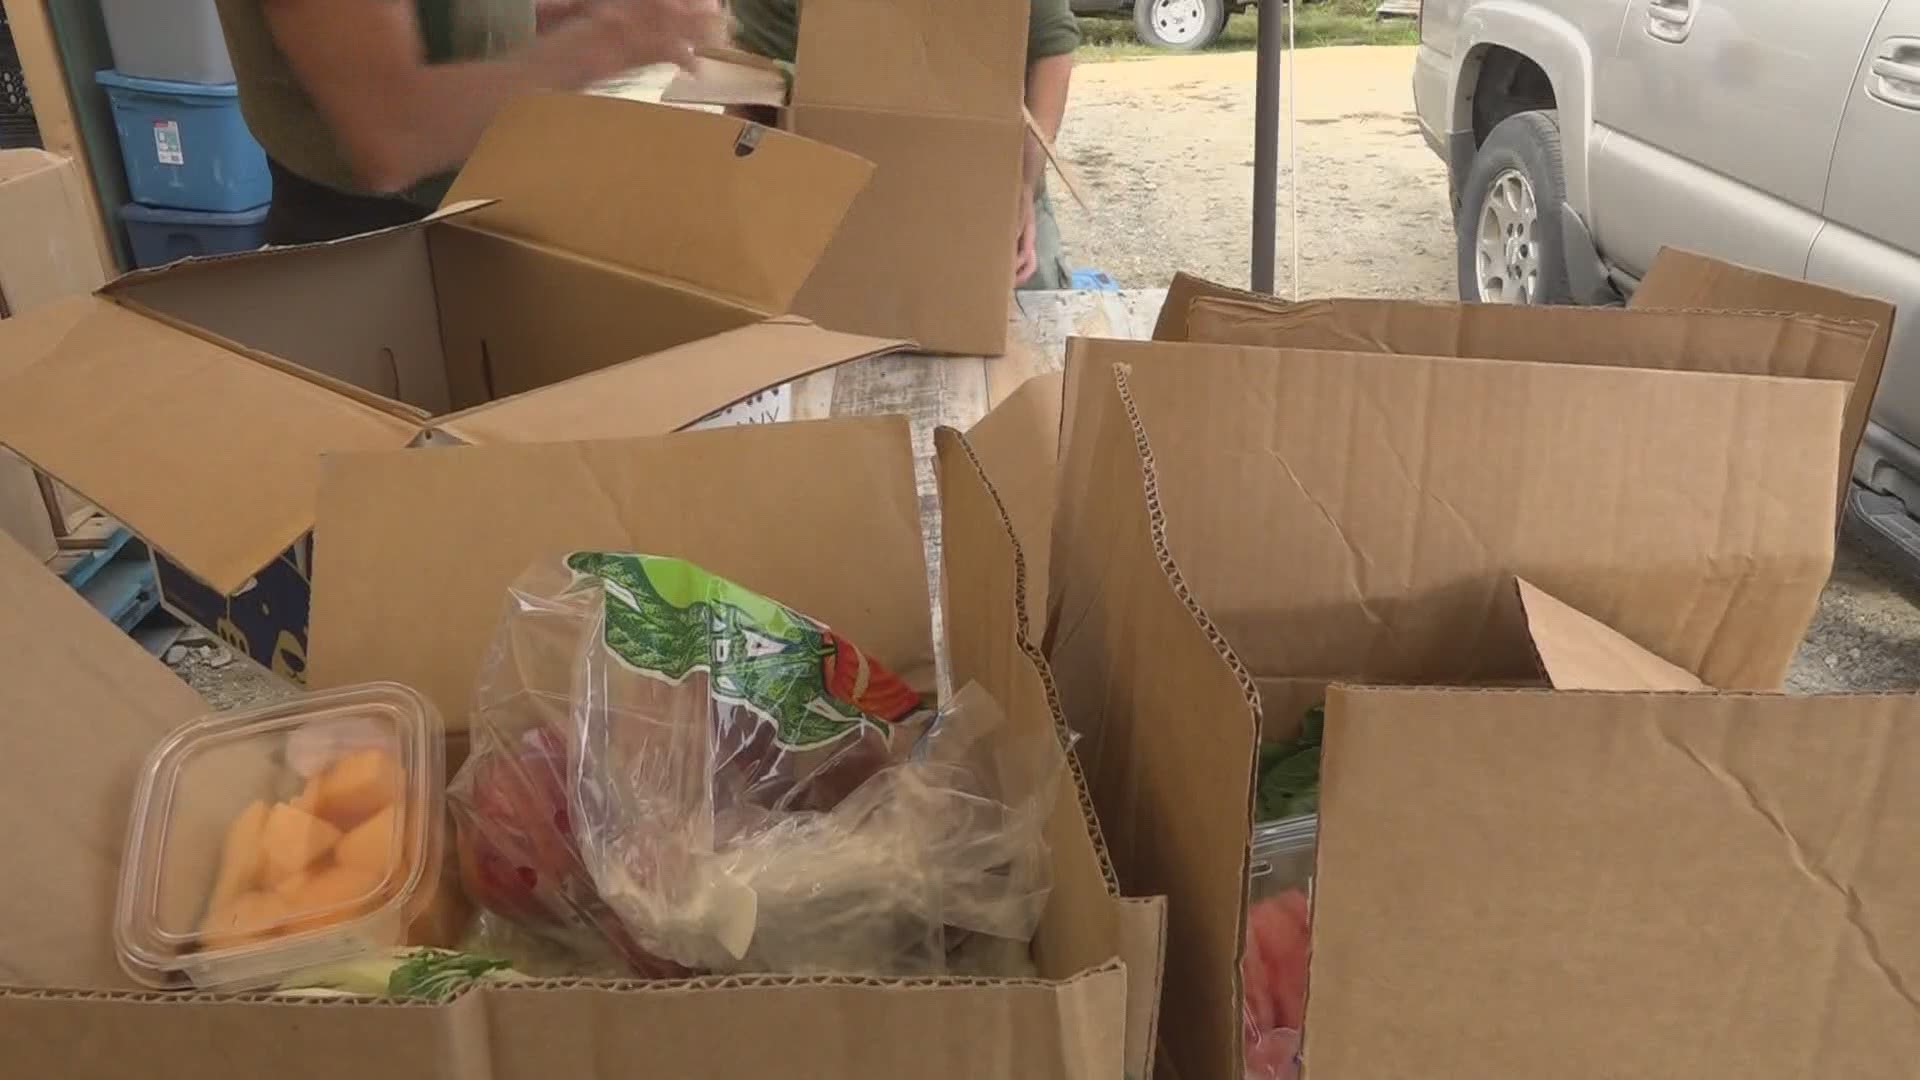 Volunteers help local residents keep better, more healthy food for those Mainers in need during the coronavirus pandemic.